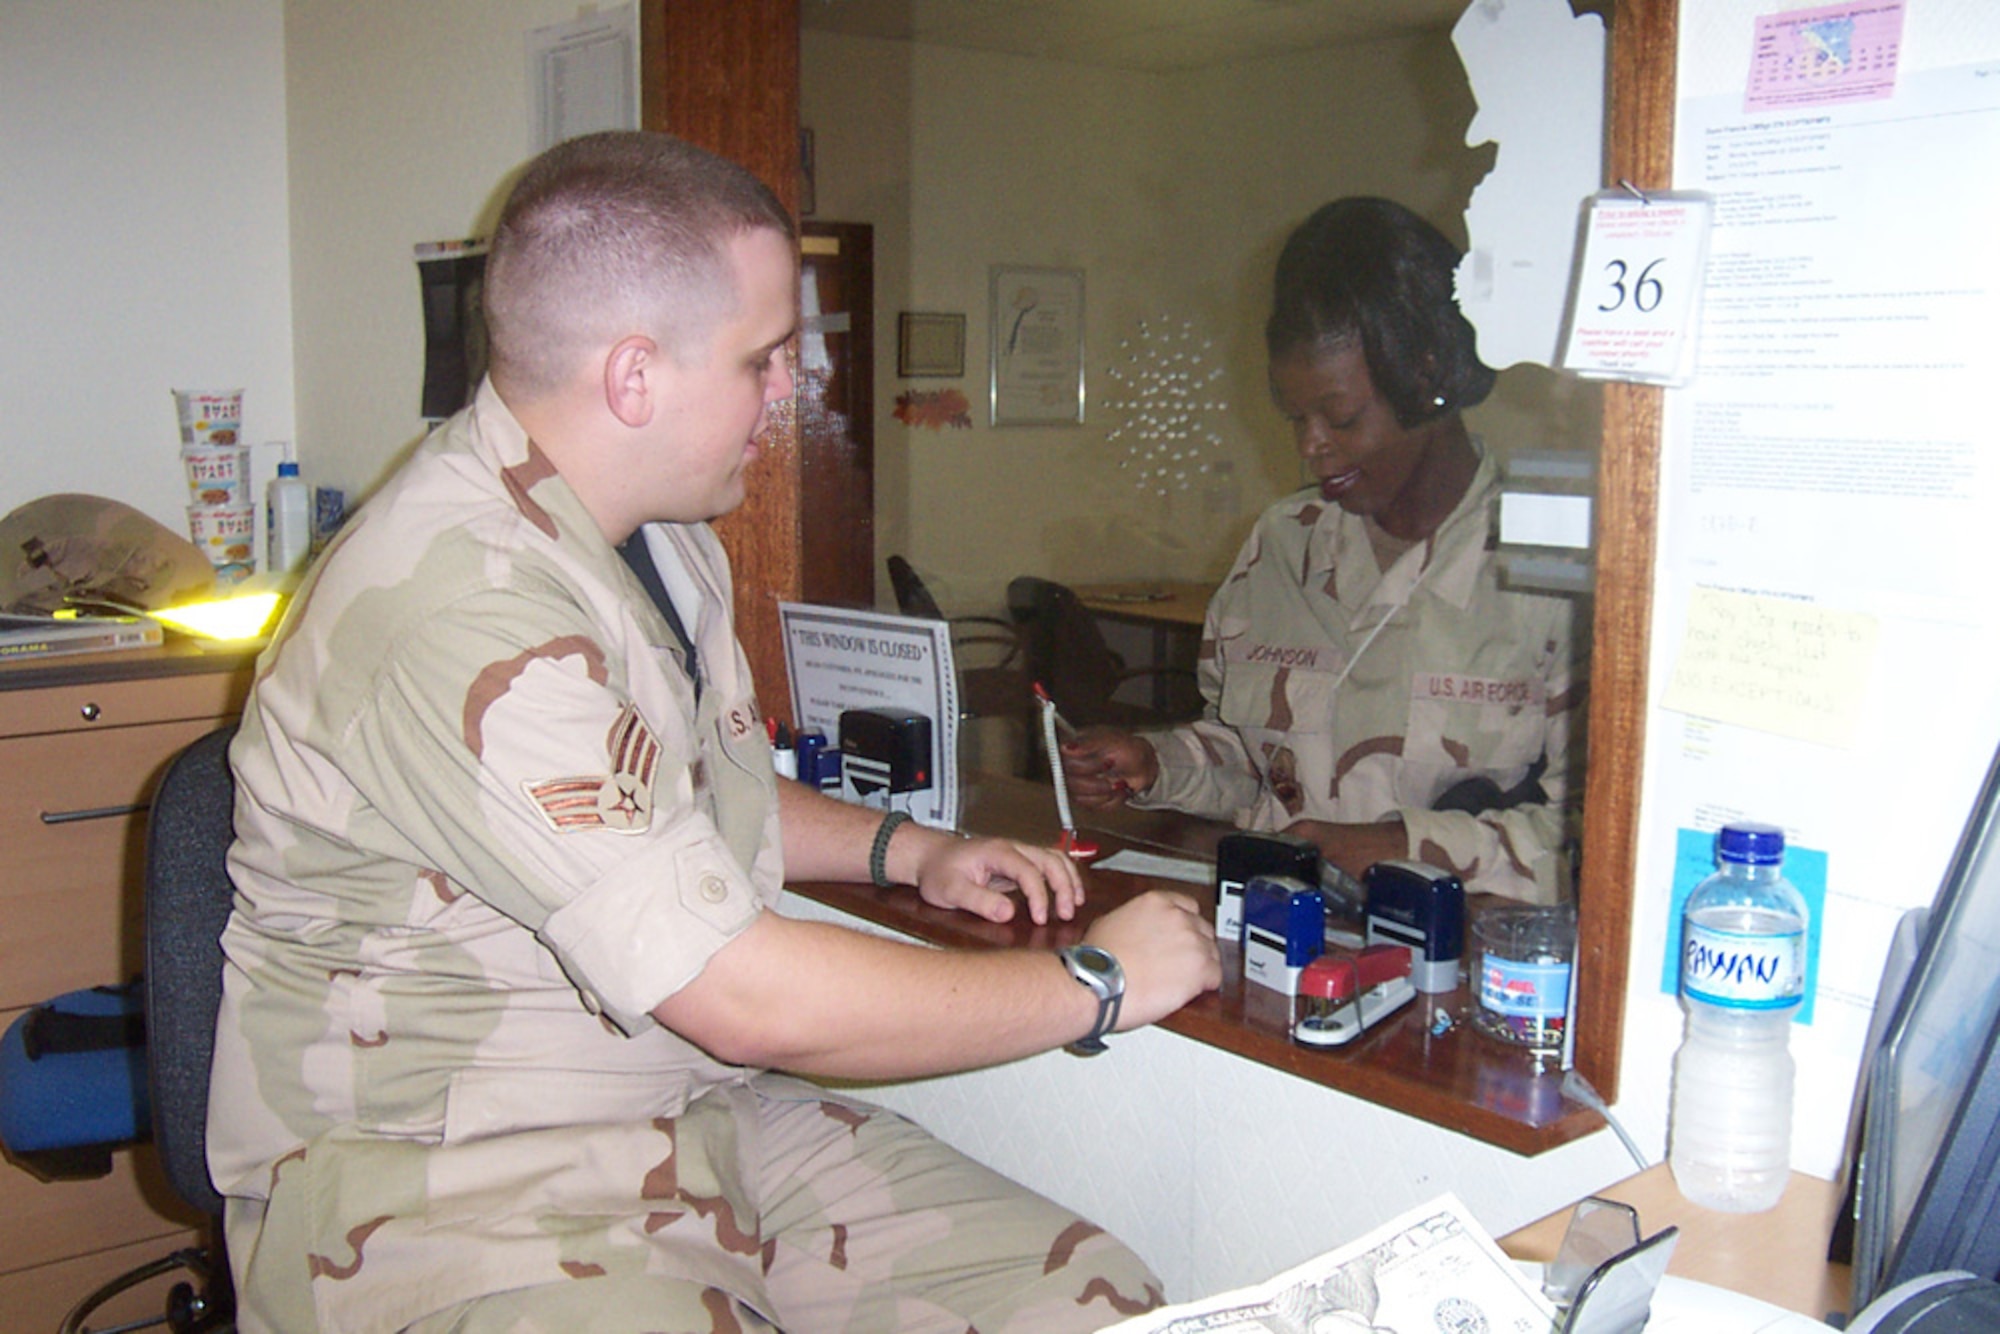 SOUTHWEST ASIA-Senior Airman Mike Hollows, a financial management technician with Air Force Reserve Command's 910th Airlift Wing, exchanges currency for an Airman at the 379th AEW Finance Office.  Hollows is deployed in support of Operation Iraqi Freedom.  U.S. Air Force photo by Capt. Brent J. Davis.